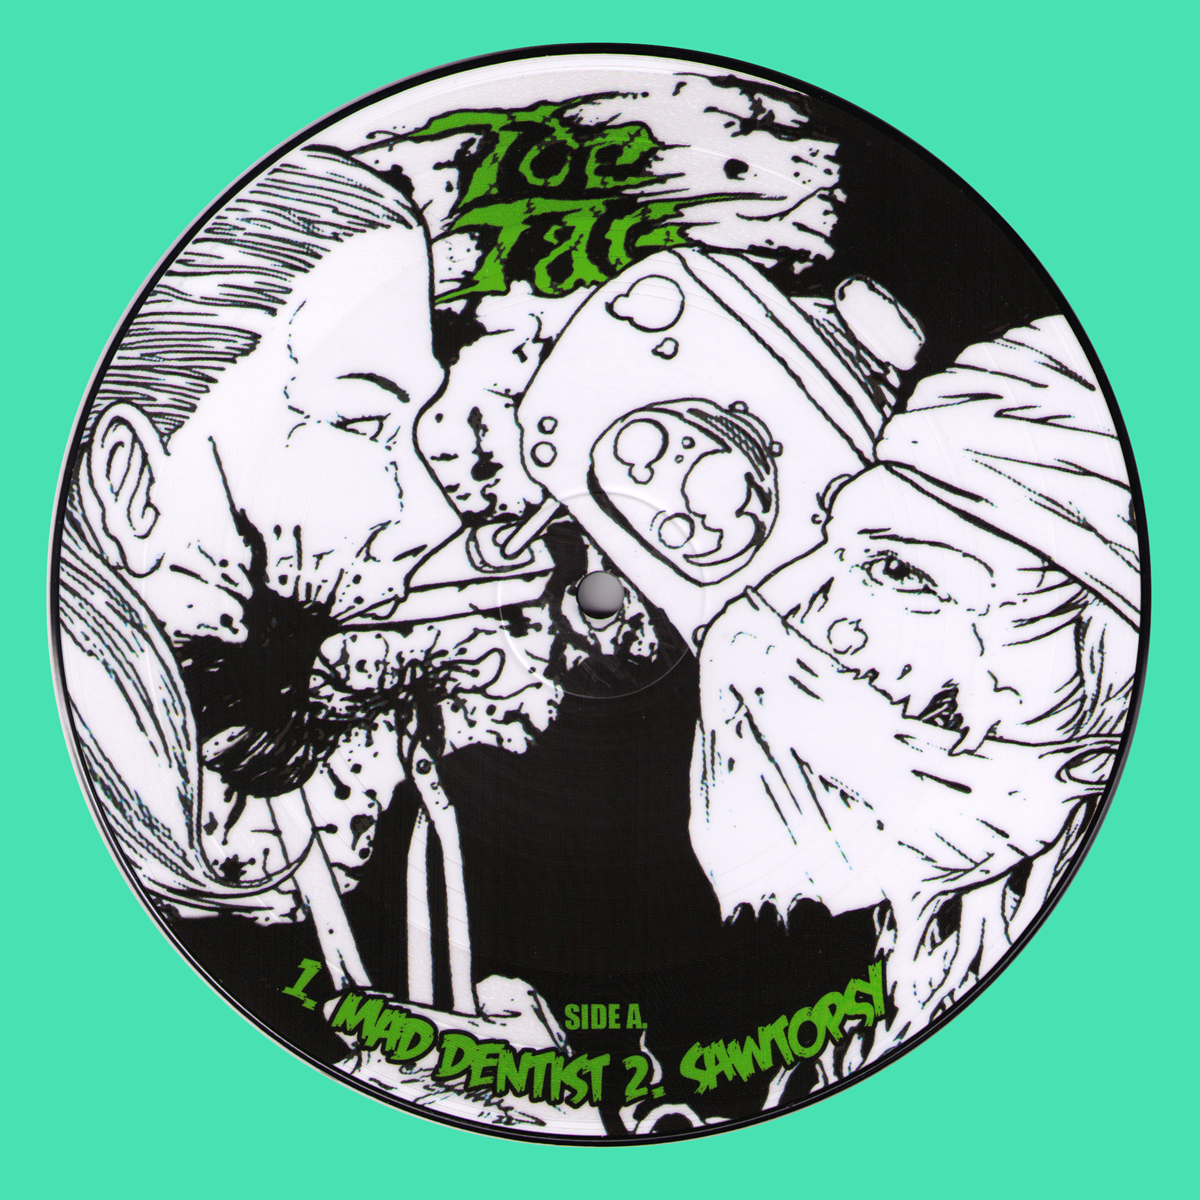 Toe Tag / Potbelly- Split 7" ~PICTURE DISC!